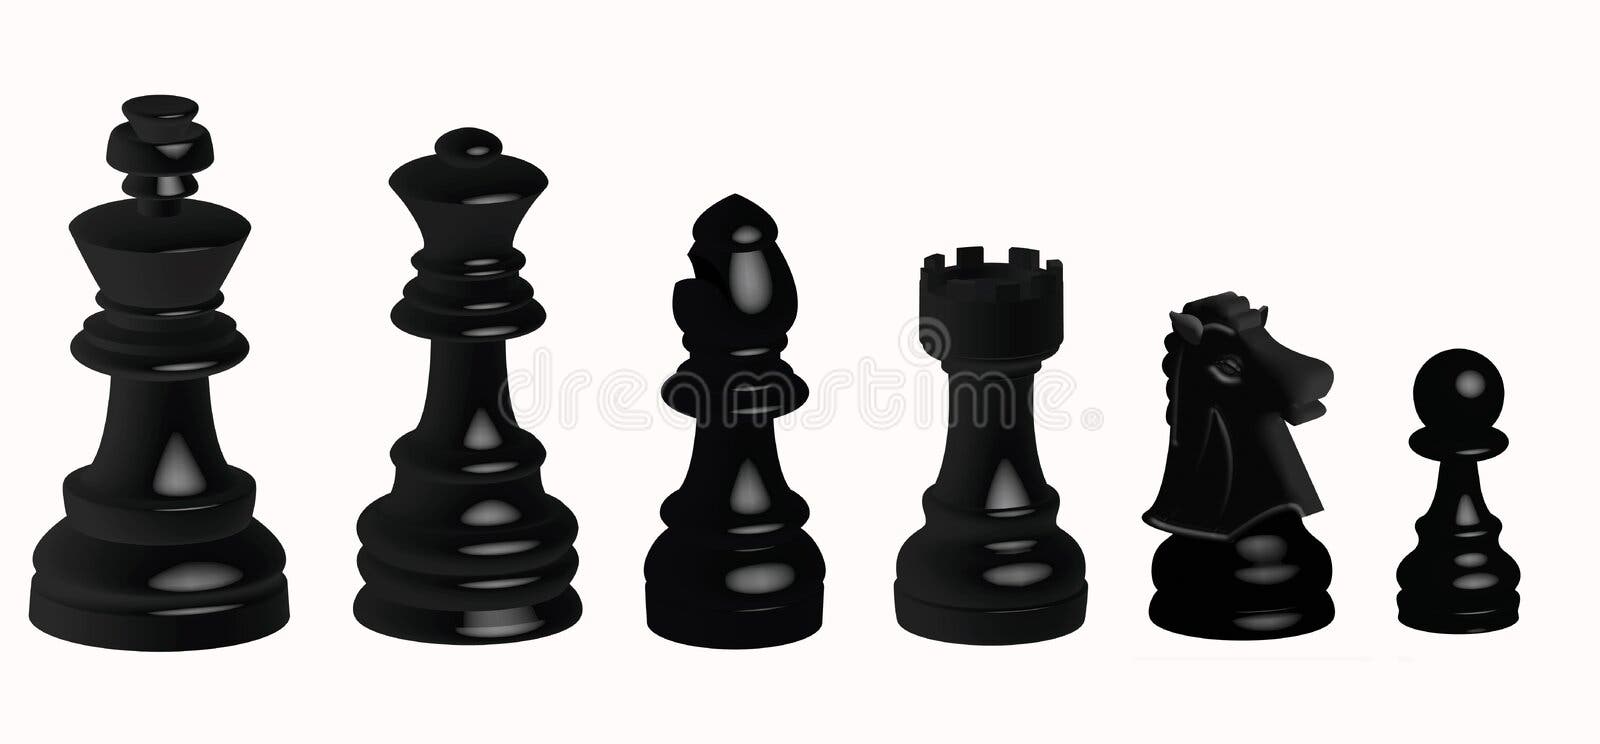 Wooden Black and White Rooks Chess Pieces Stock Photo - Image of